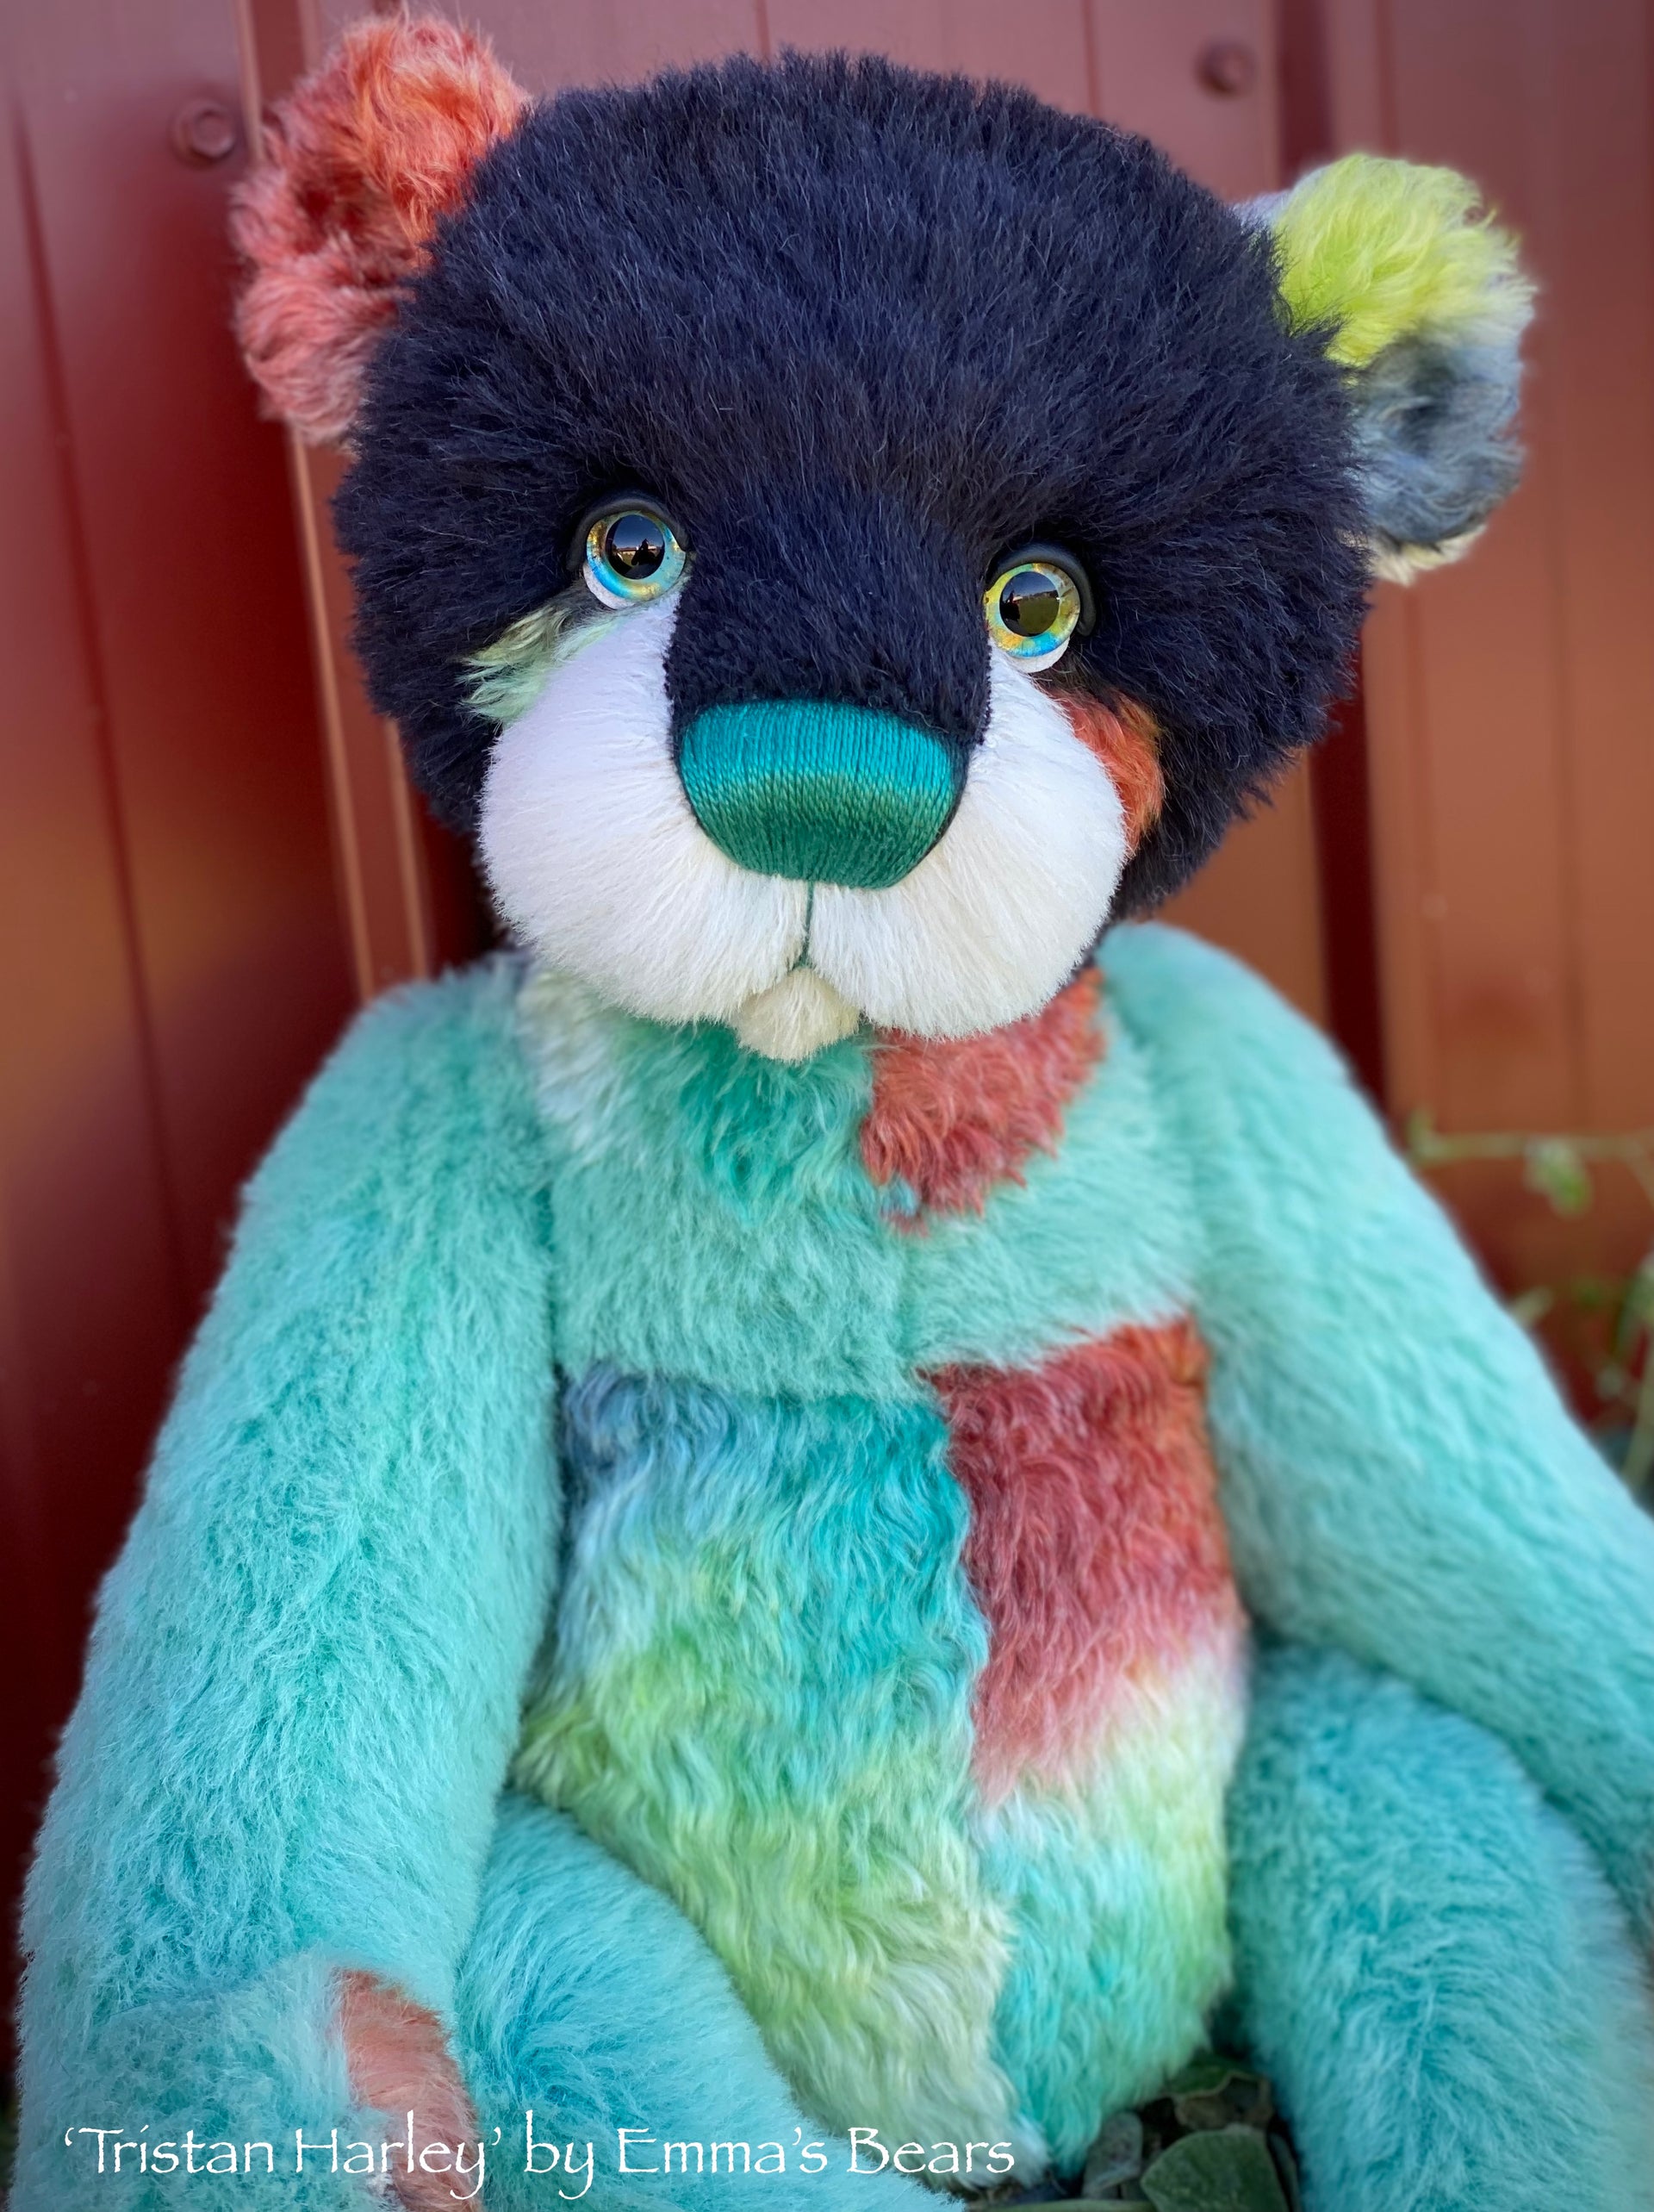 Tristan Harley - 21" Hand-dyed Mohair, Viscose and Alpaca Artist toddler style Bear by Emmas Bears - OOAK